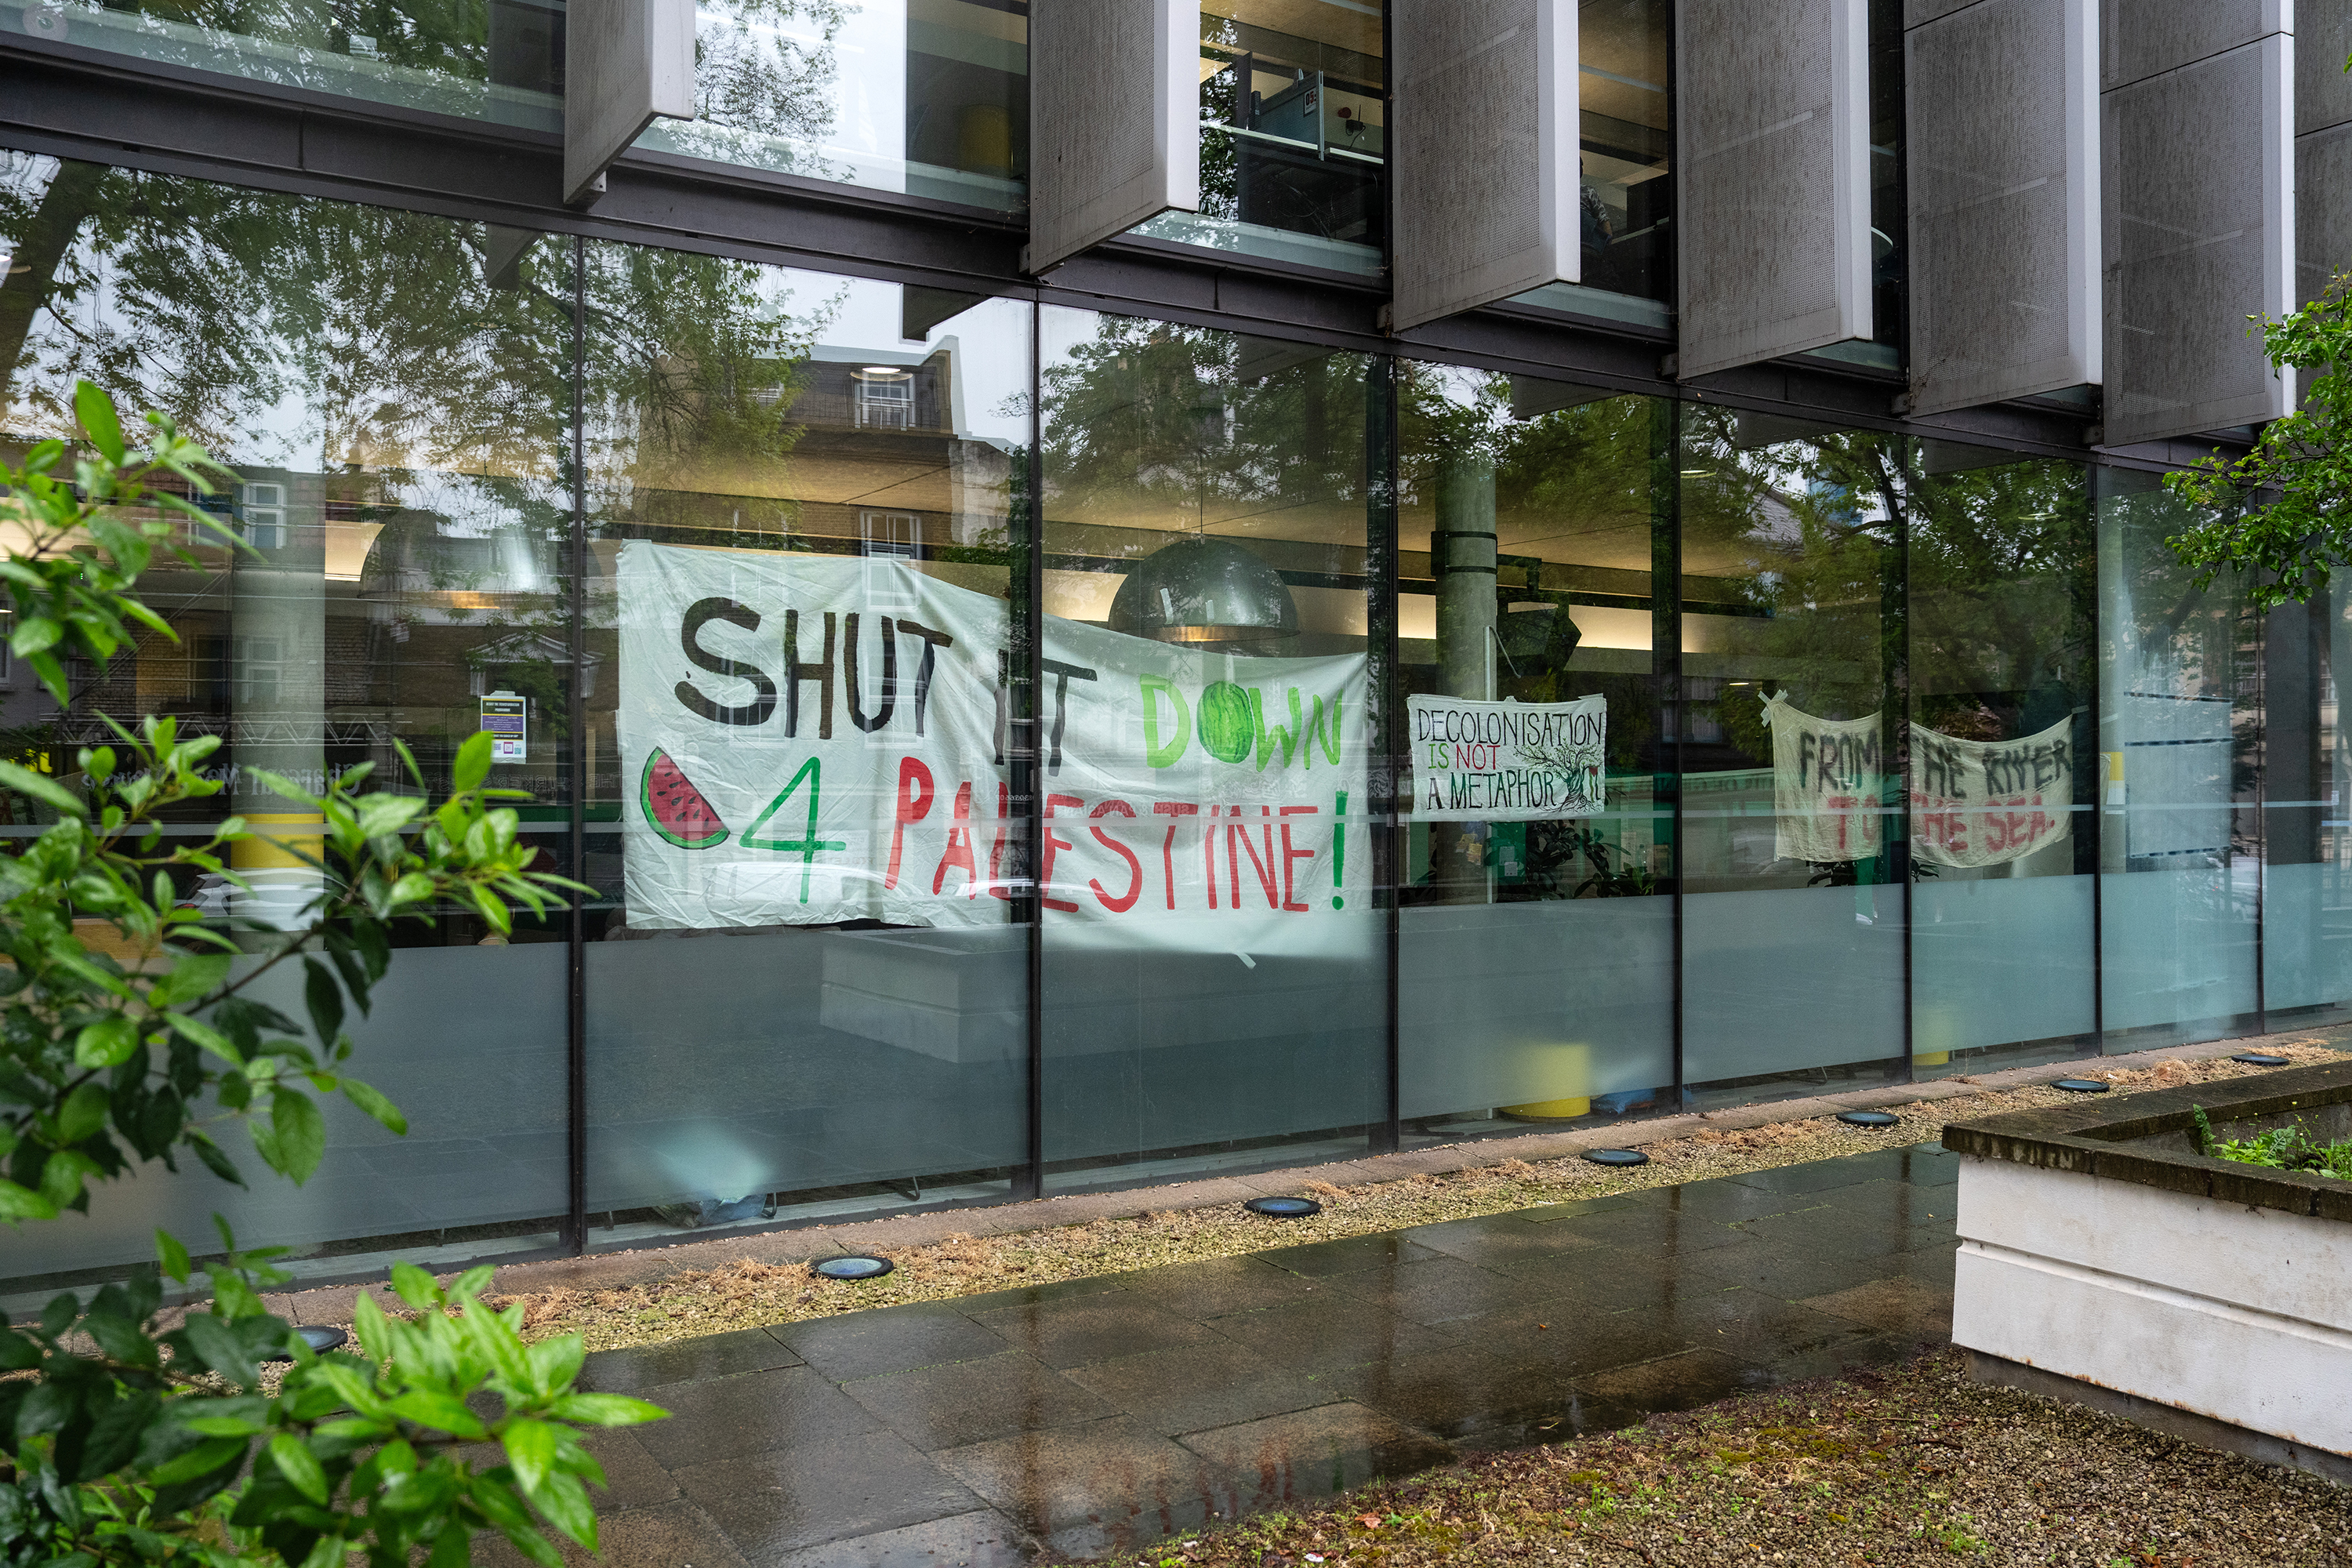 Banners in support of Palestinians are displayed in the window of Goldsmiths university library in London on May 3.